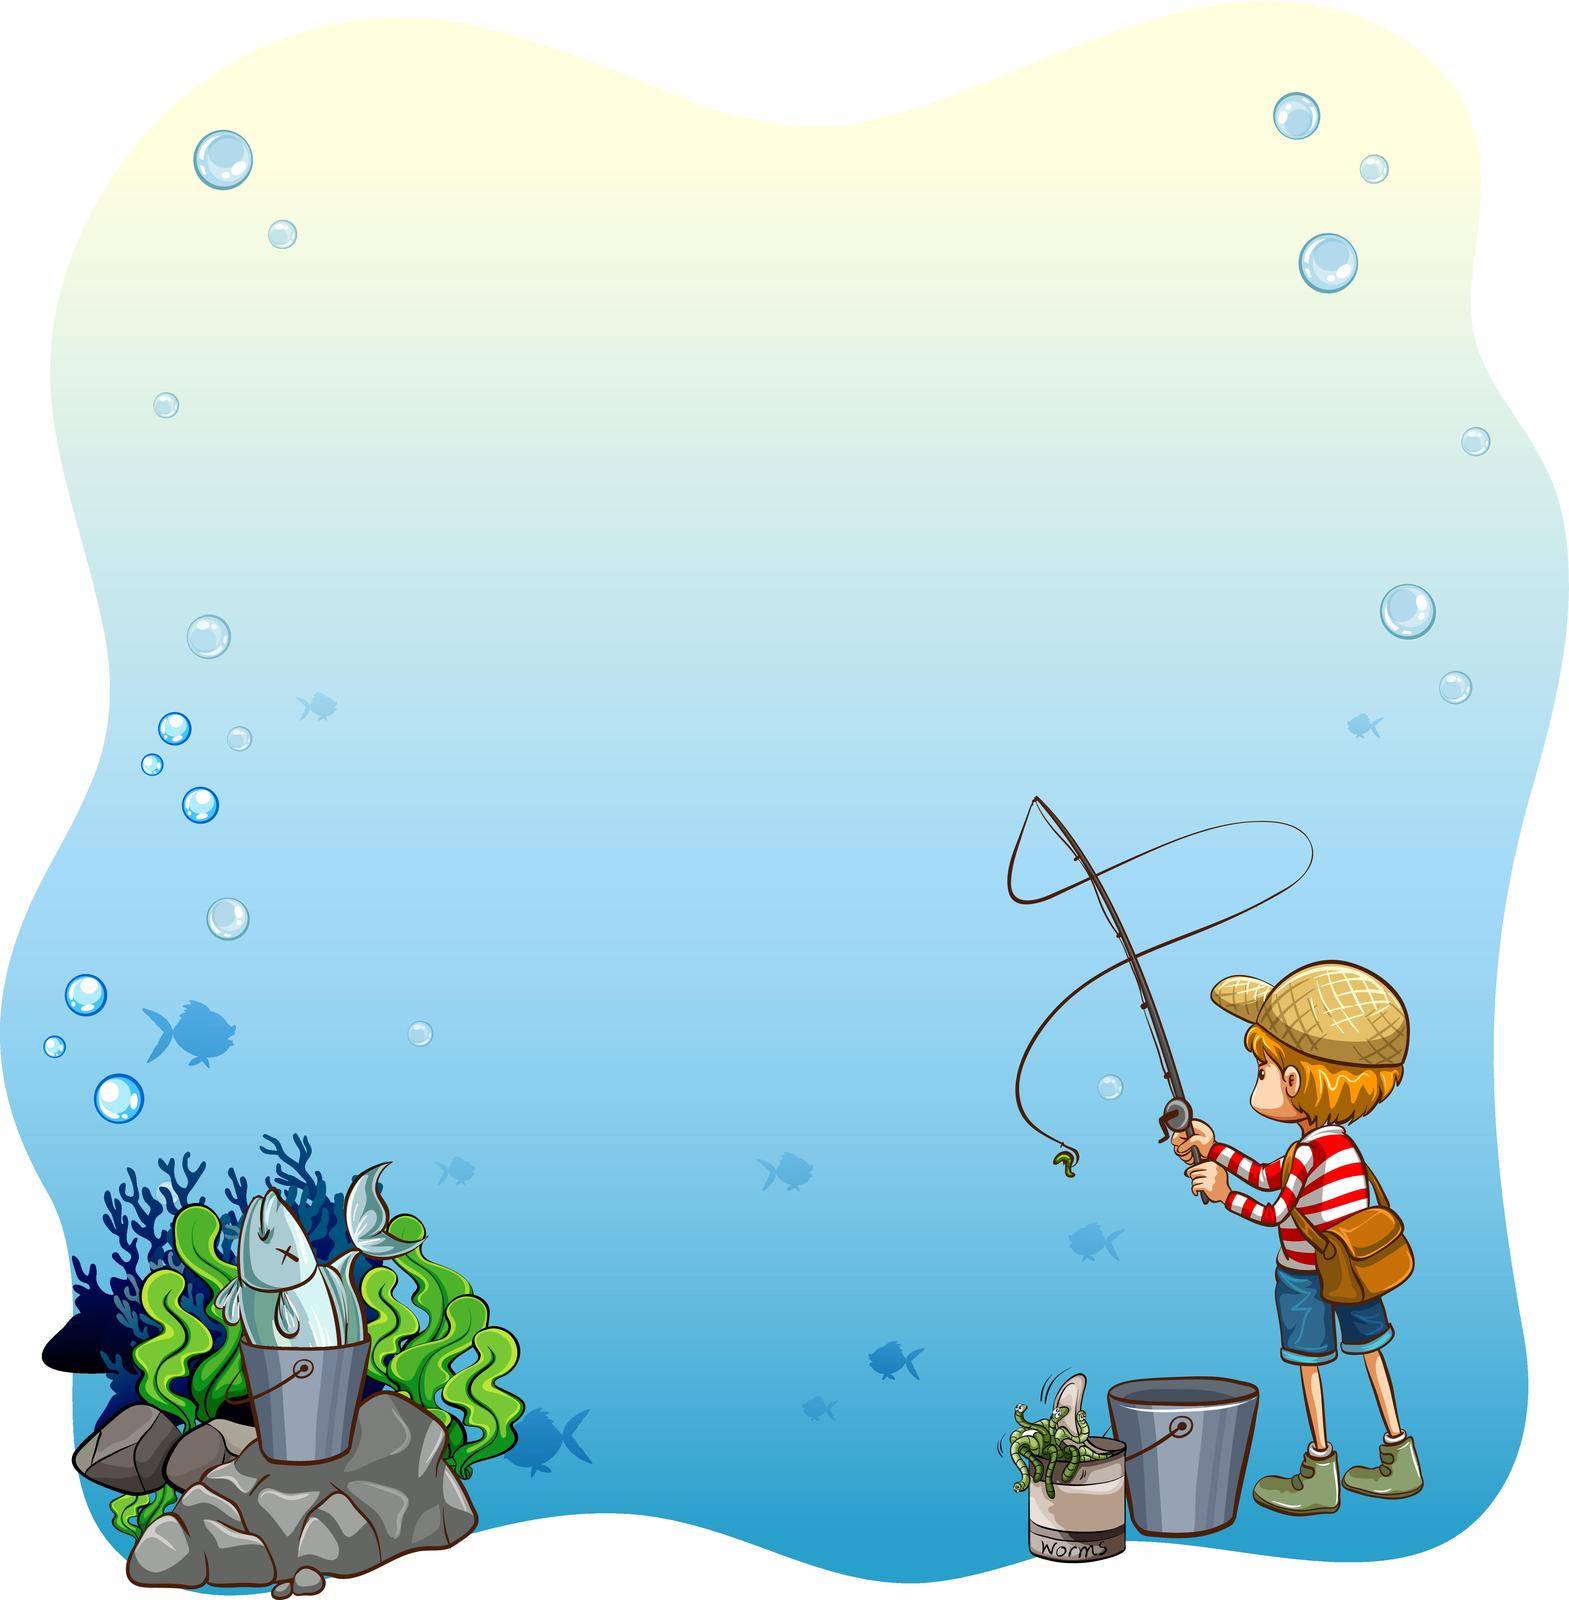 Writing space with boy fishing alone background